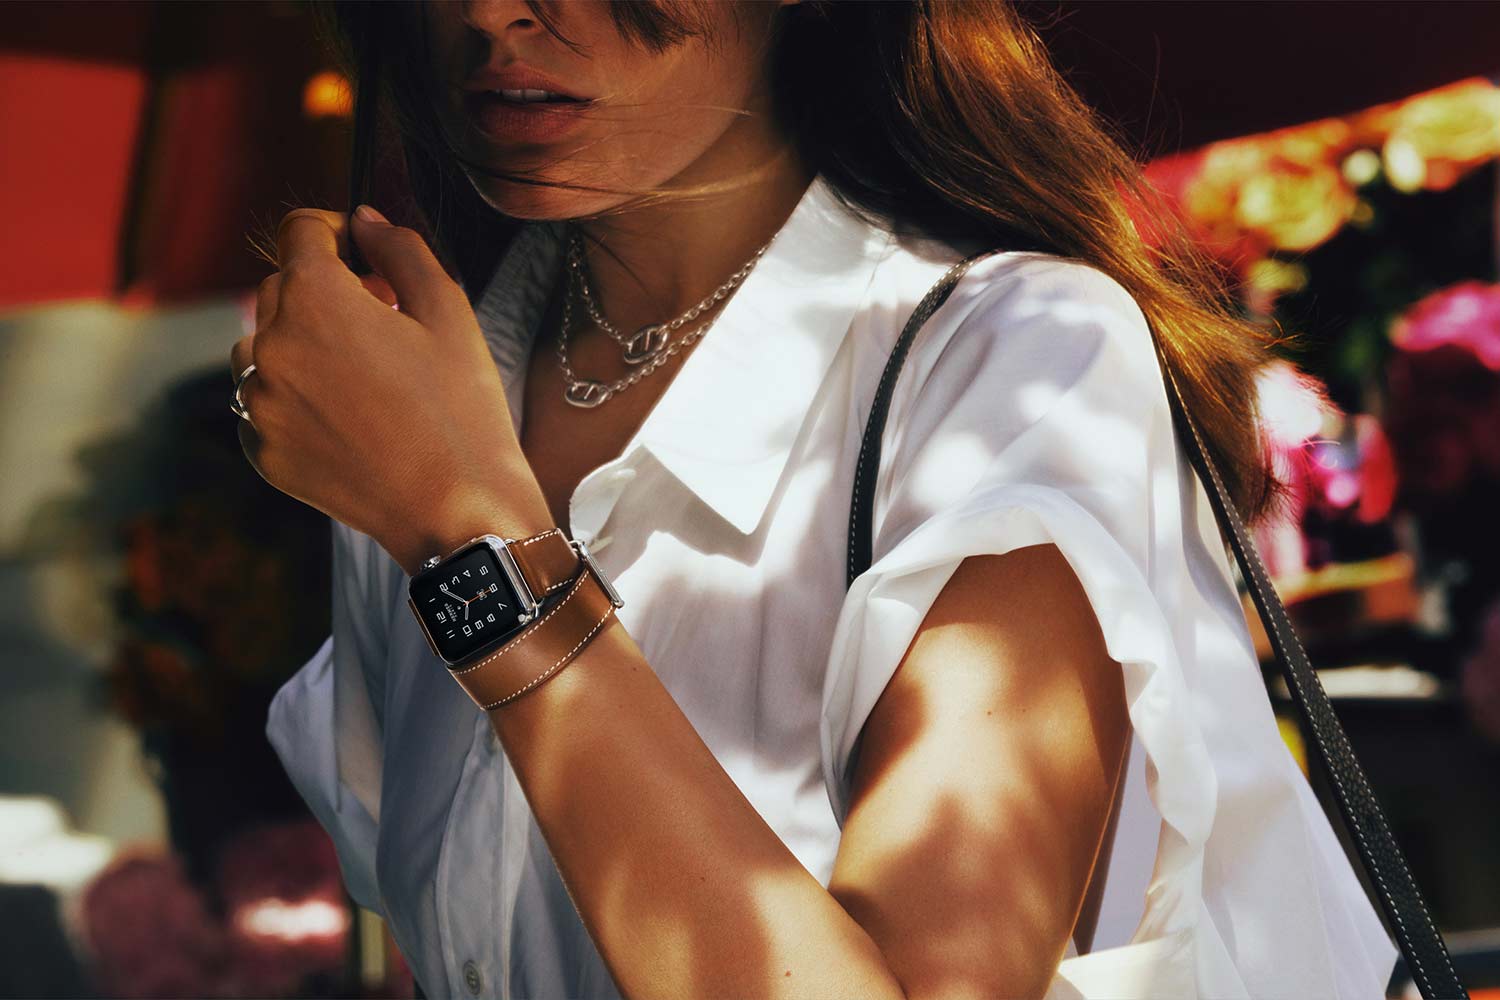 Hermès still offers Apple Watch Series 9 with leather bands